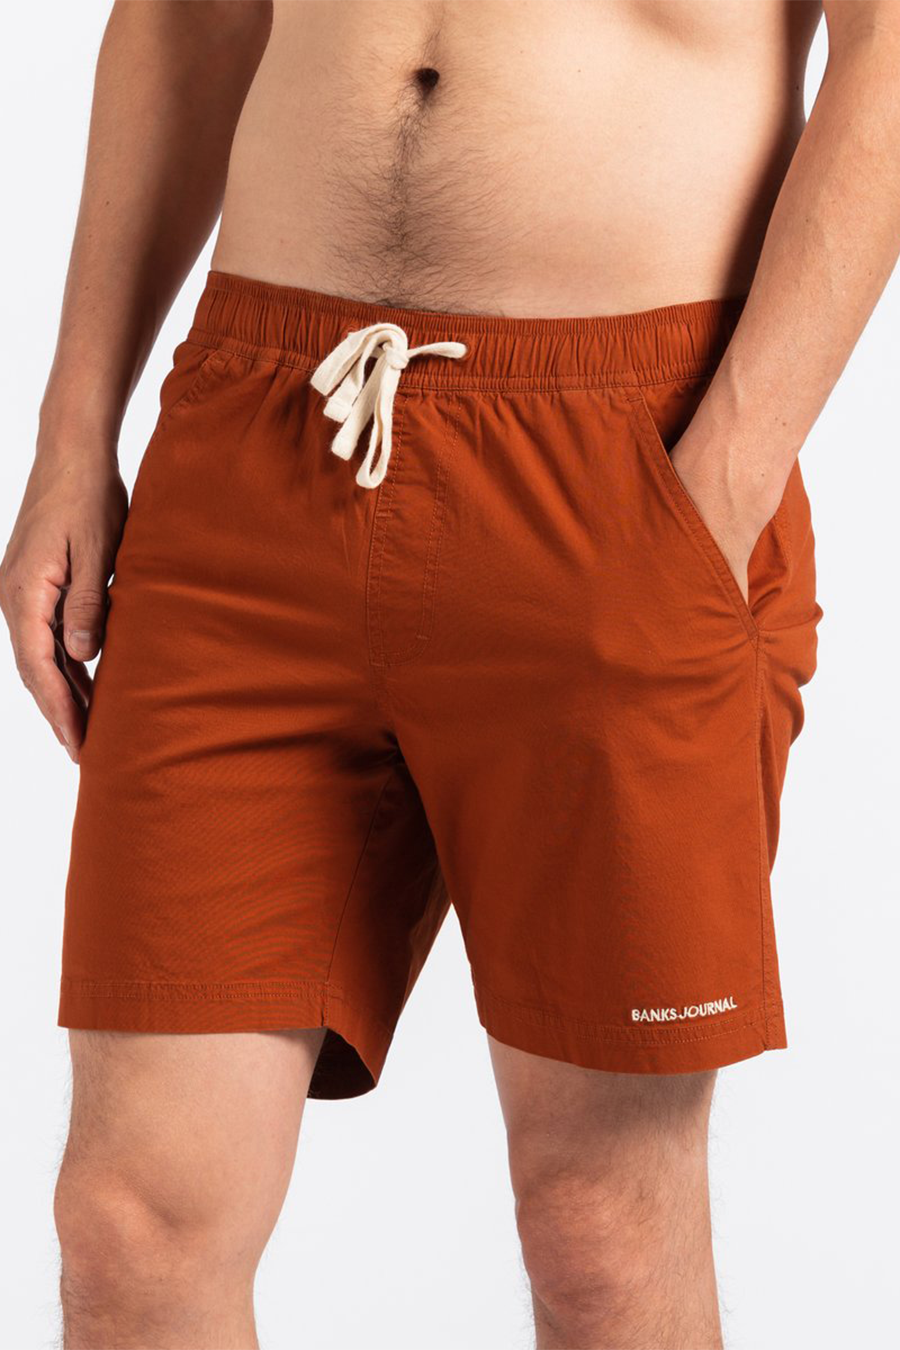 Label Elastic Boardshort | Baked Clay - Main Image Number 2 of 3